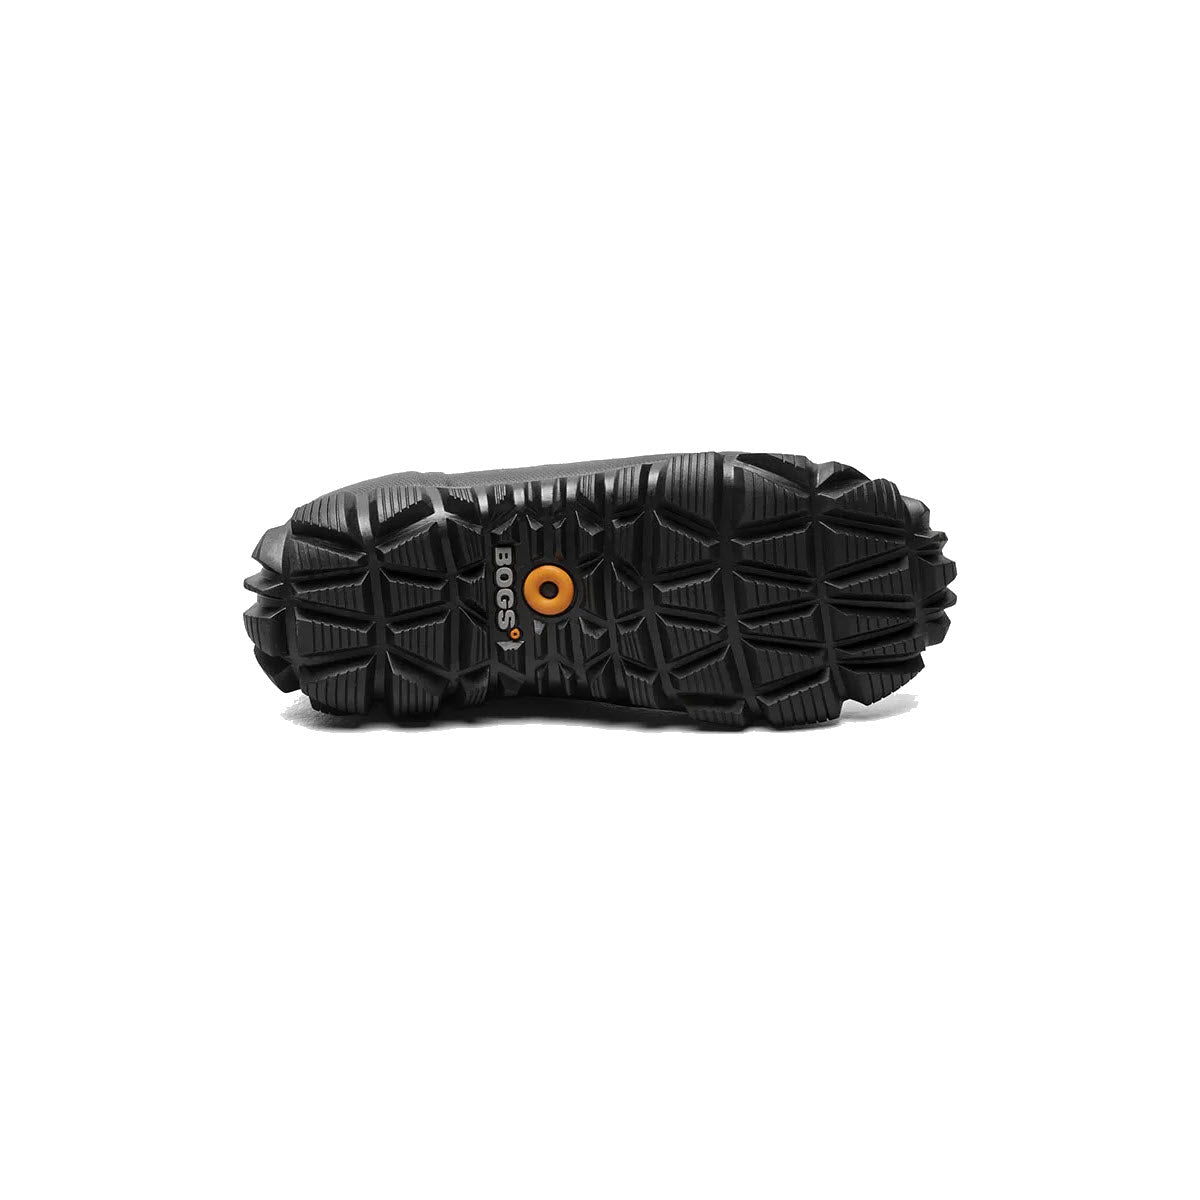 A detailed view of the black rubber sole of a Bogs boot, showing its deep tread pattern and central orange logo, enhanced with comfort rated waterproof insulation.